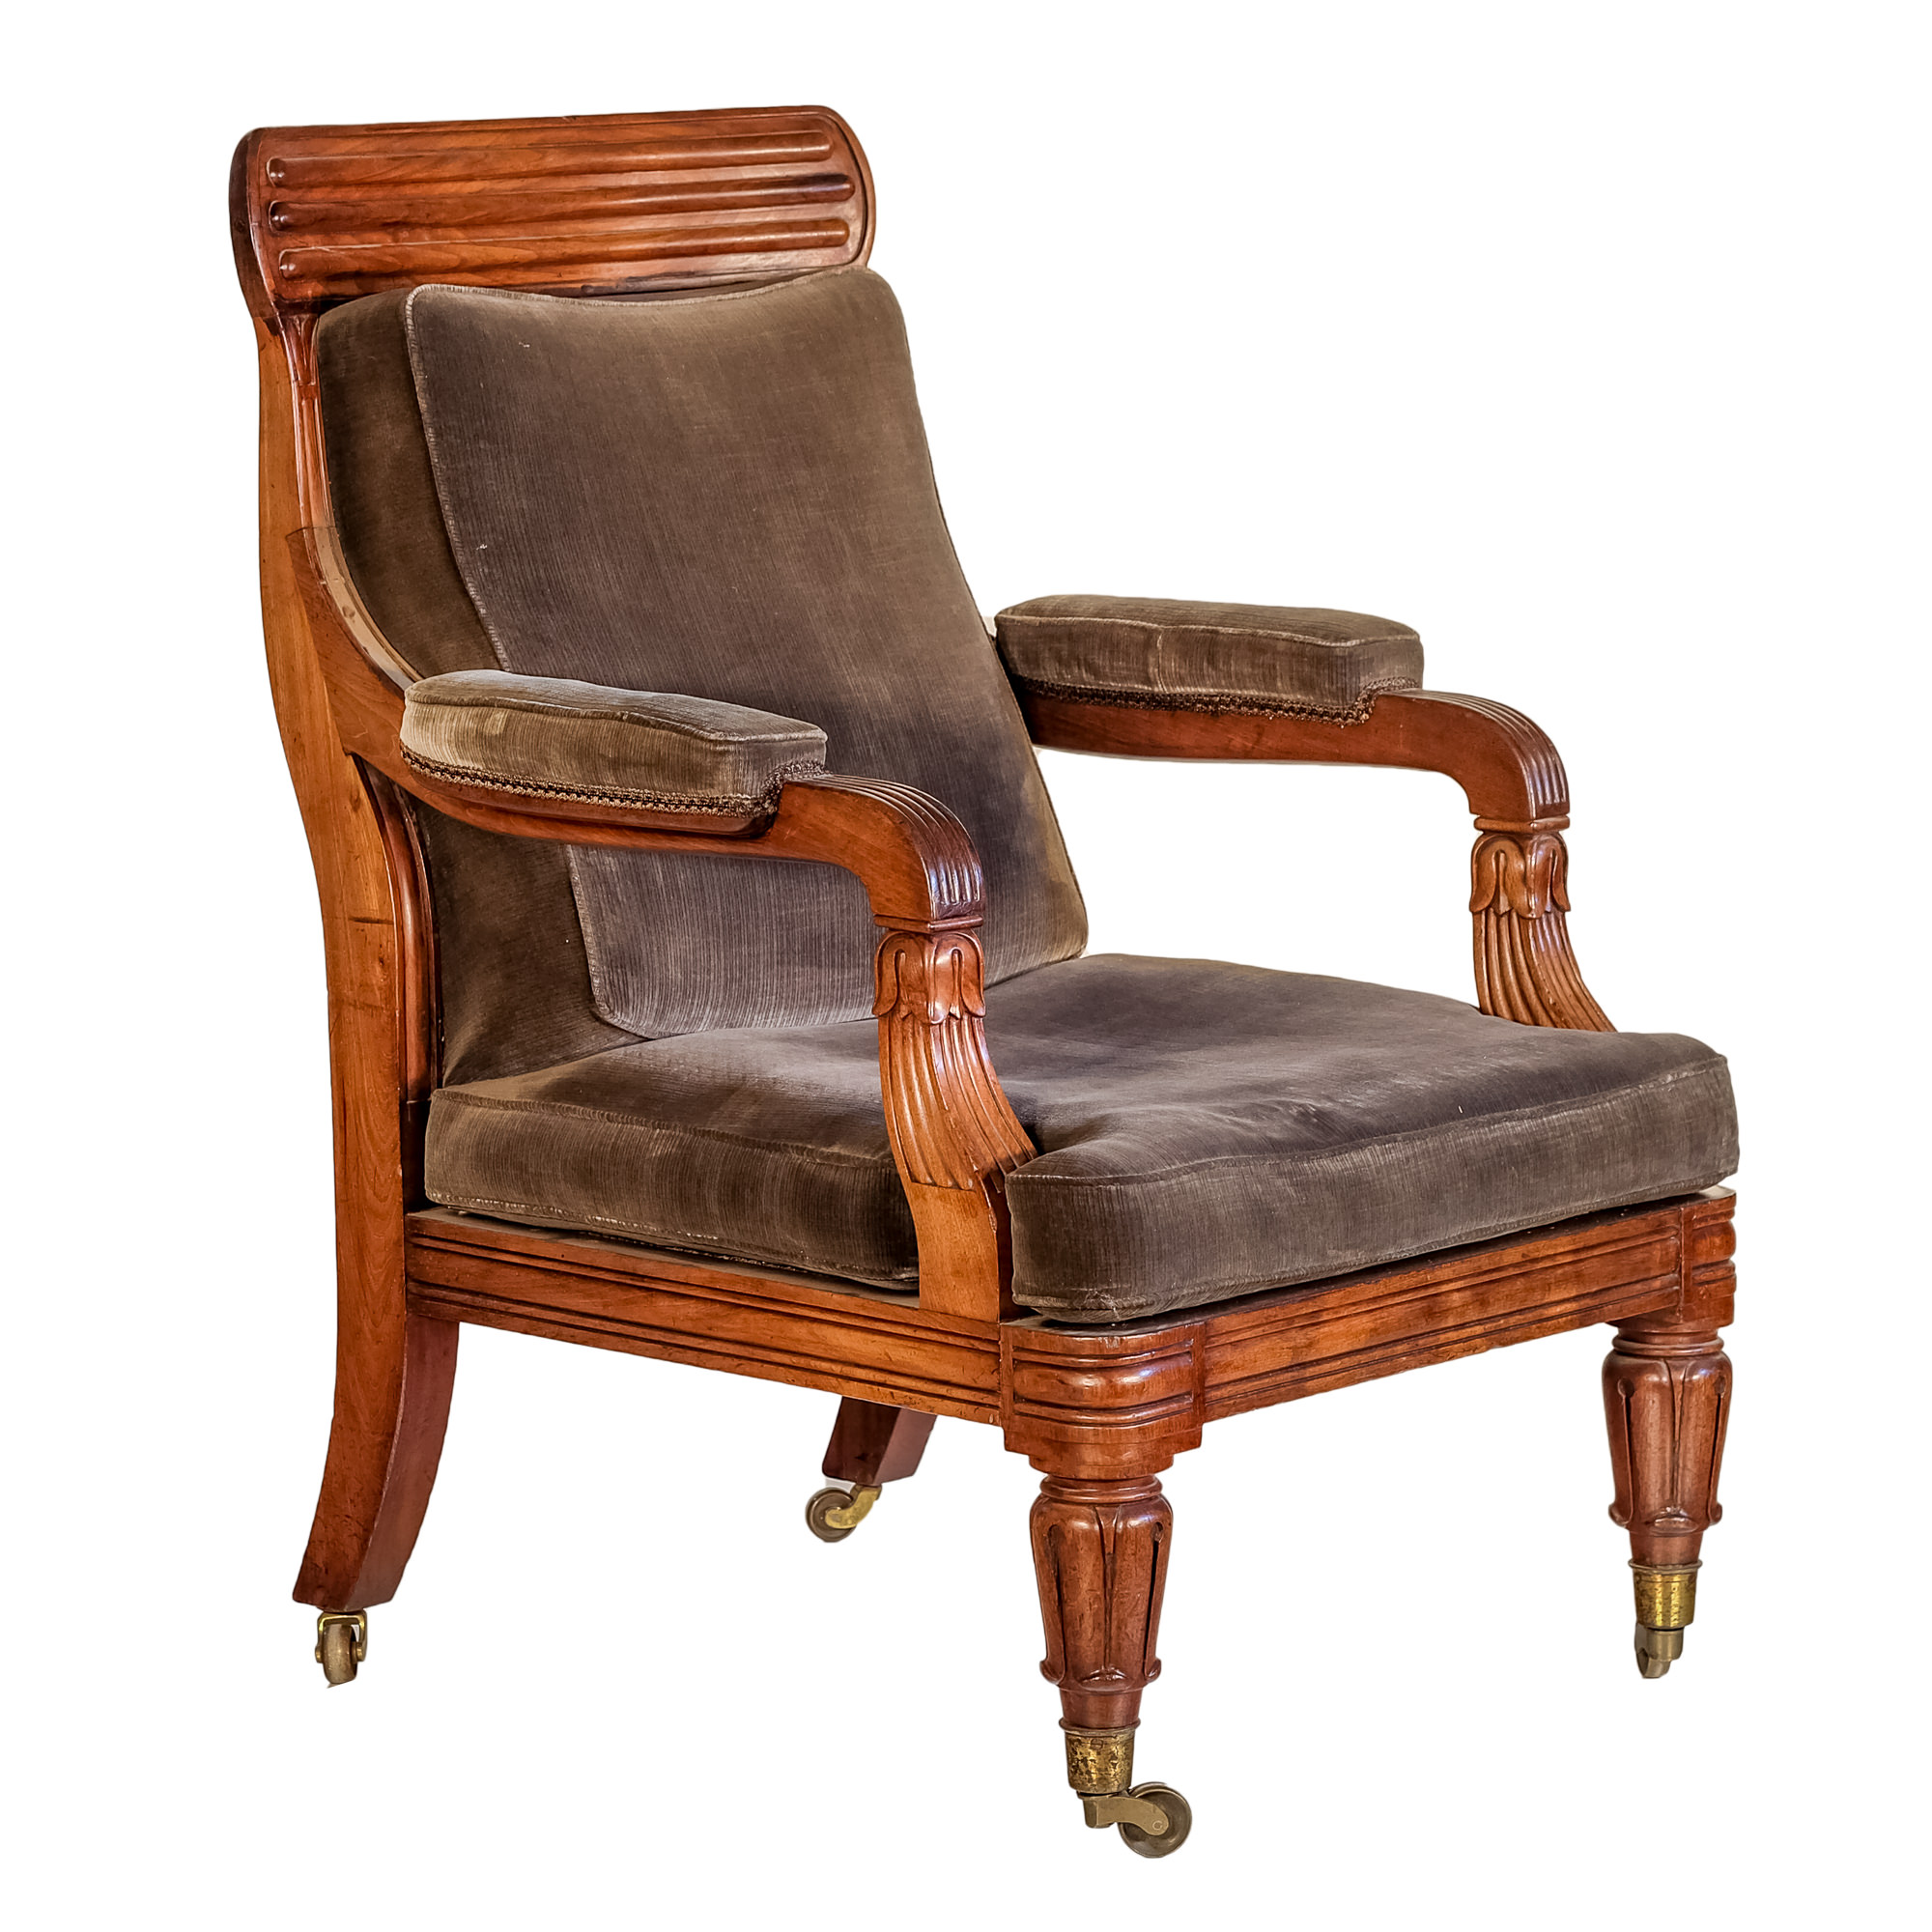 'Superb George IV Mahogany Drawing Room Chair by Joseph Stammers London Circa 1830'